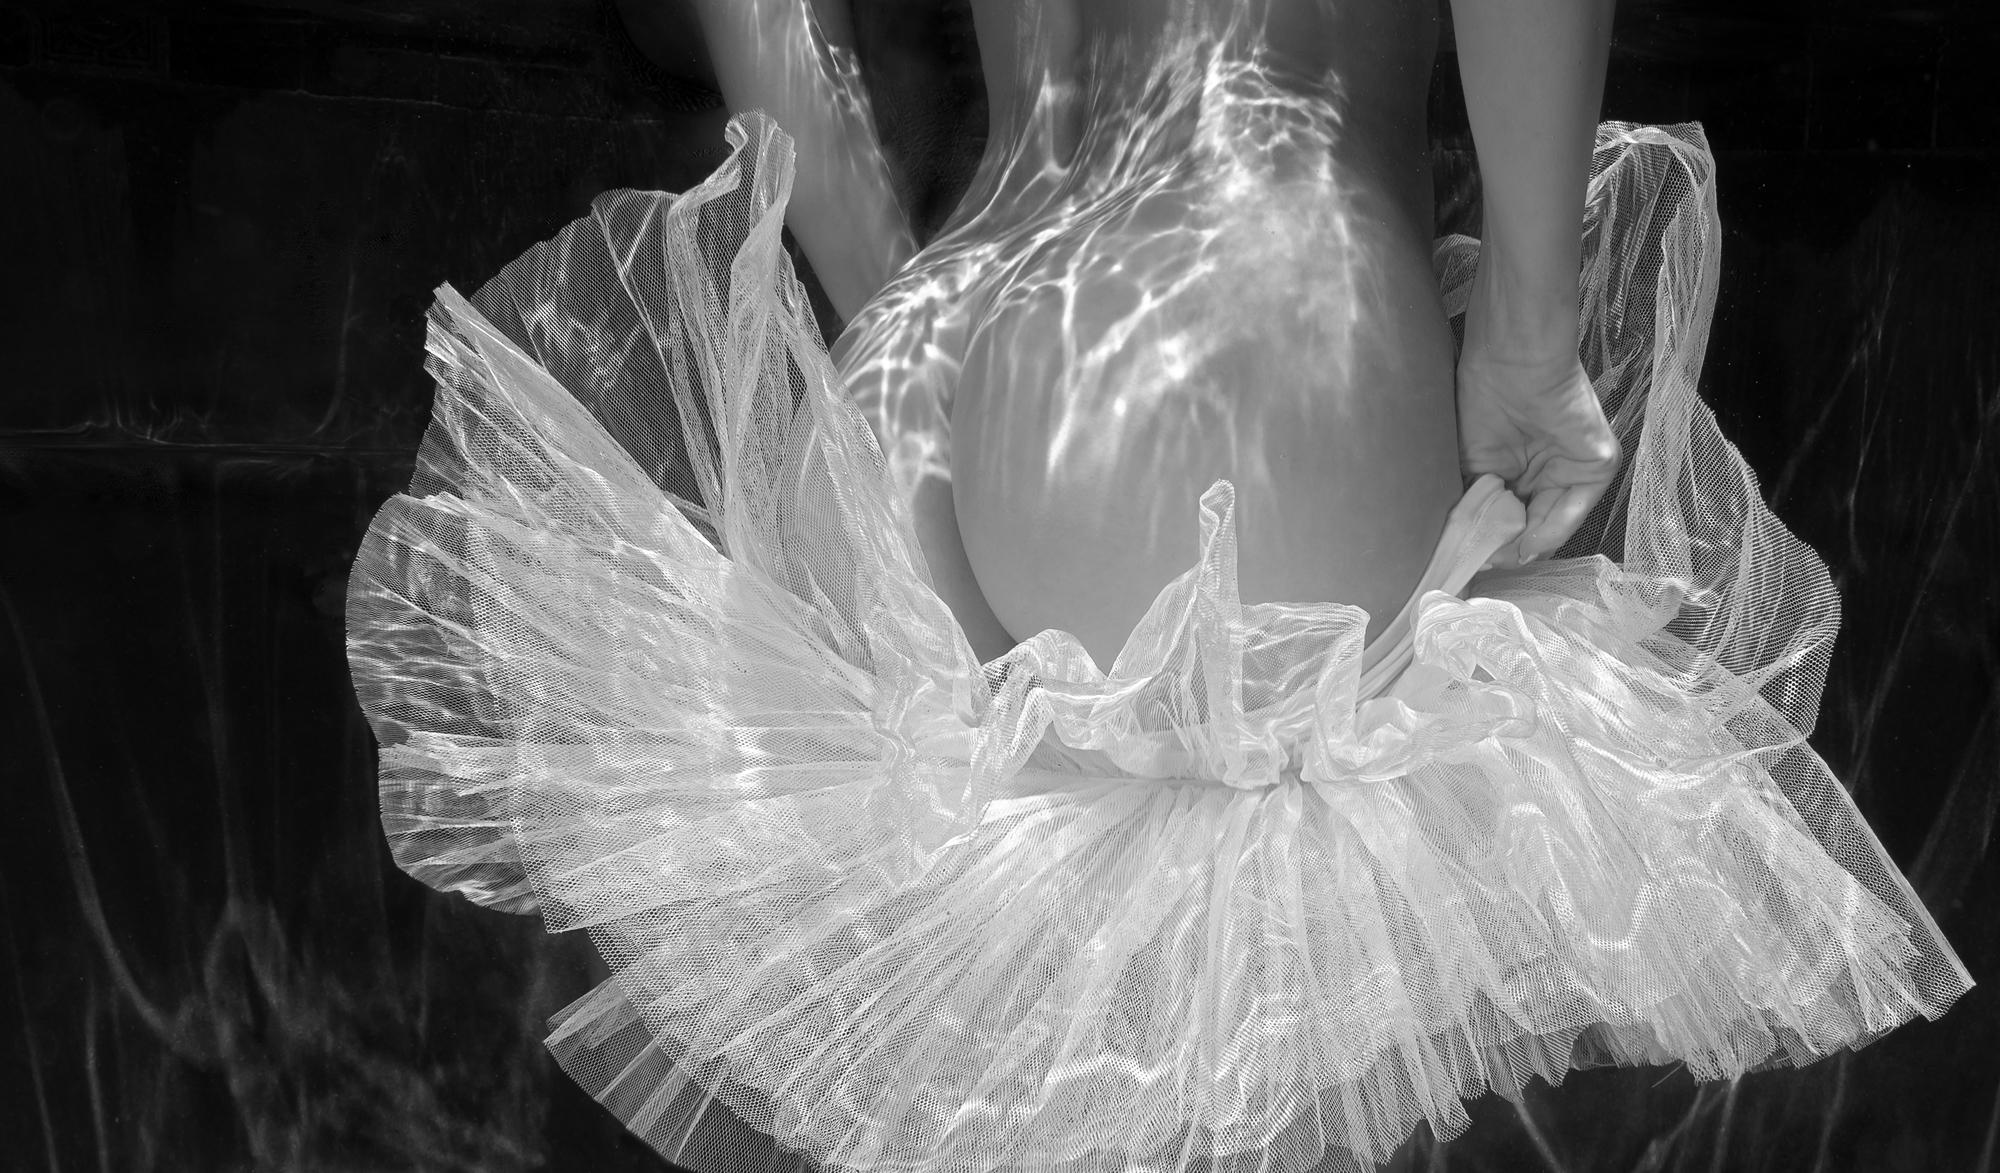 Alex Sher Nude Photograph - Tutu Skirt - underwater black & white nude photograph - print on paper 36" x 60"